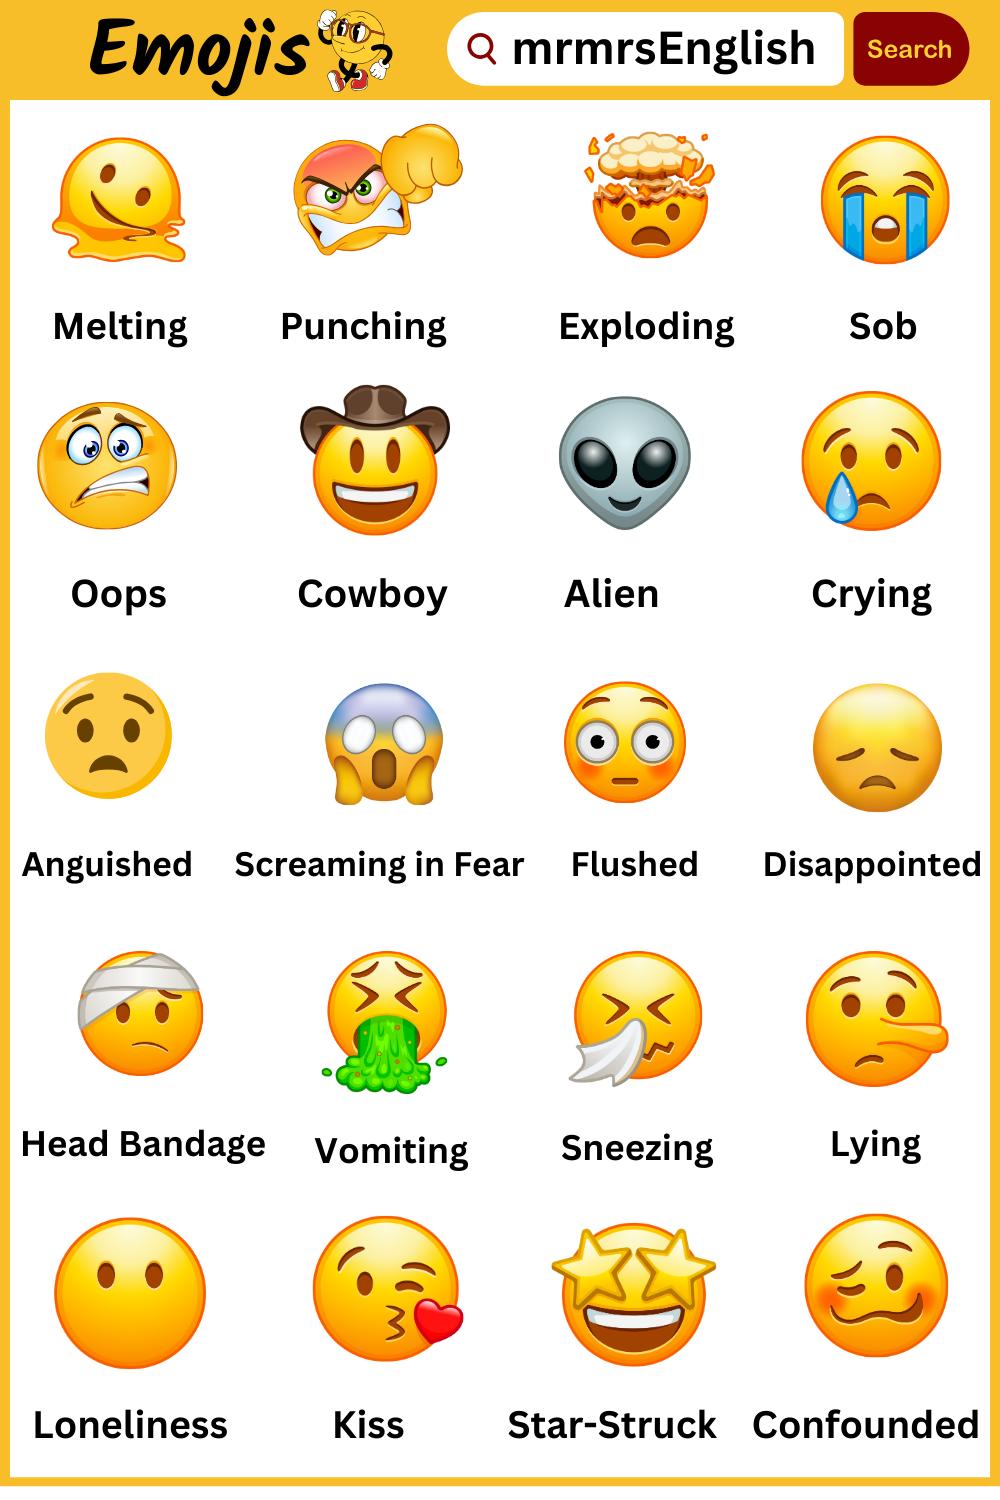 Emojis and Their Meaning